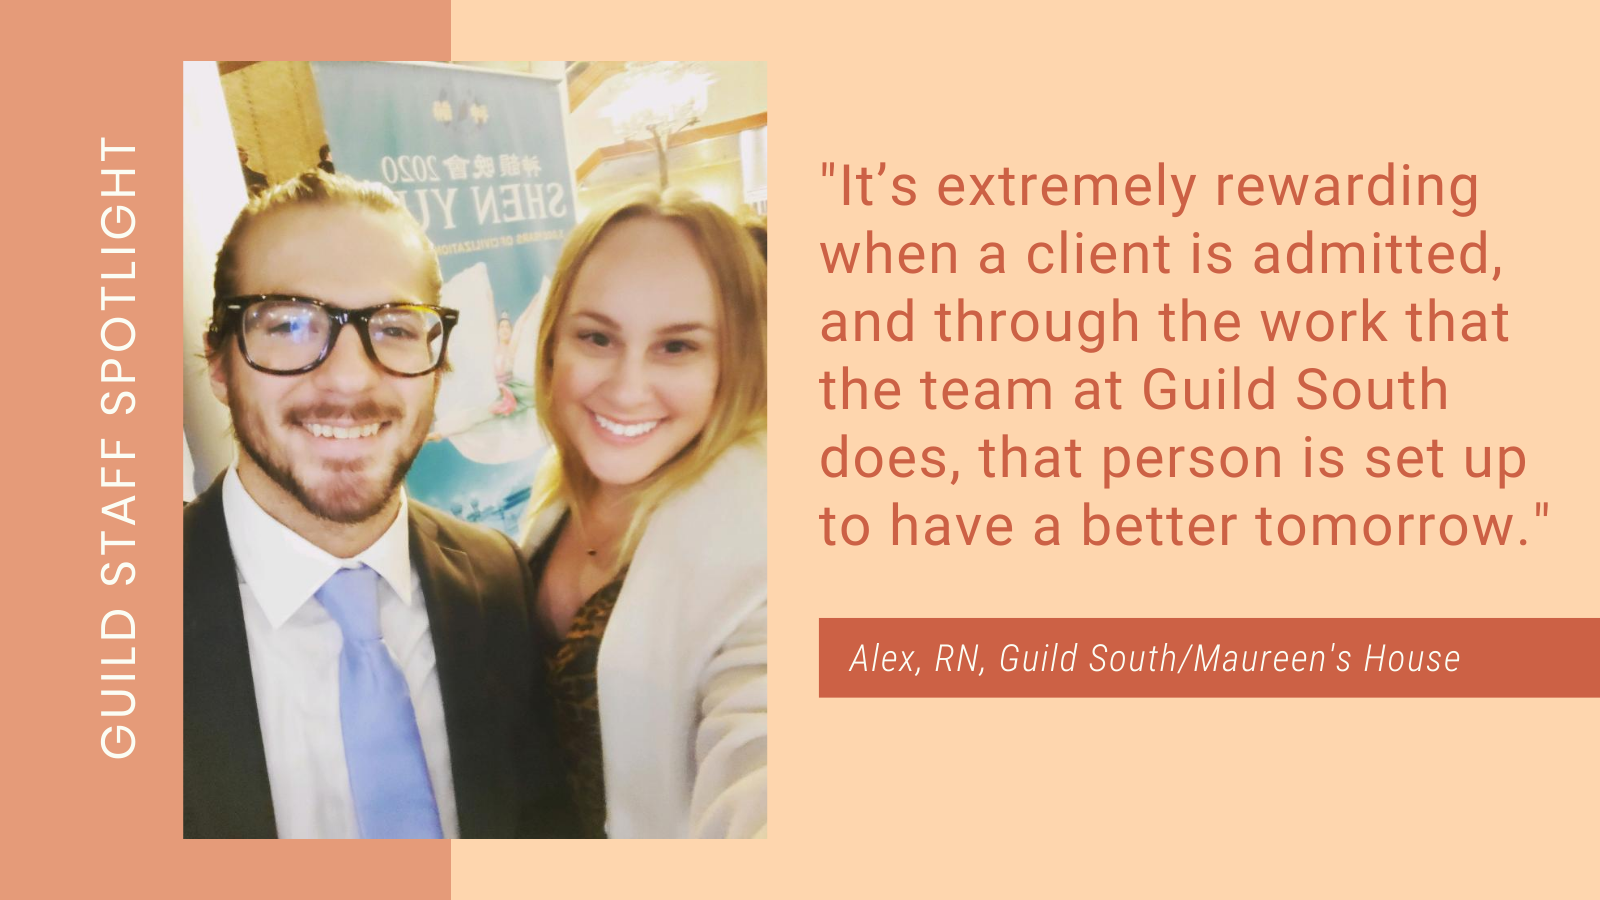 RN Alex and the quote "It’s extremely rewarding when a client is admitted and through the work that the team at Guild South does that person is set up to have a better tomorrow."